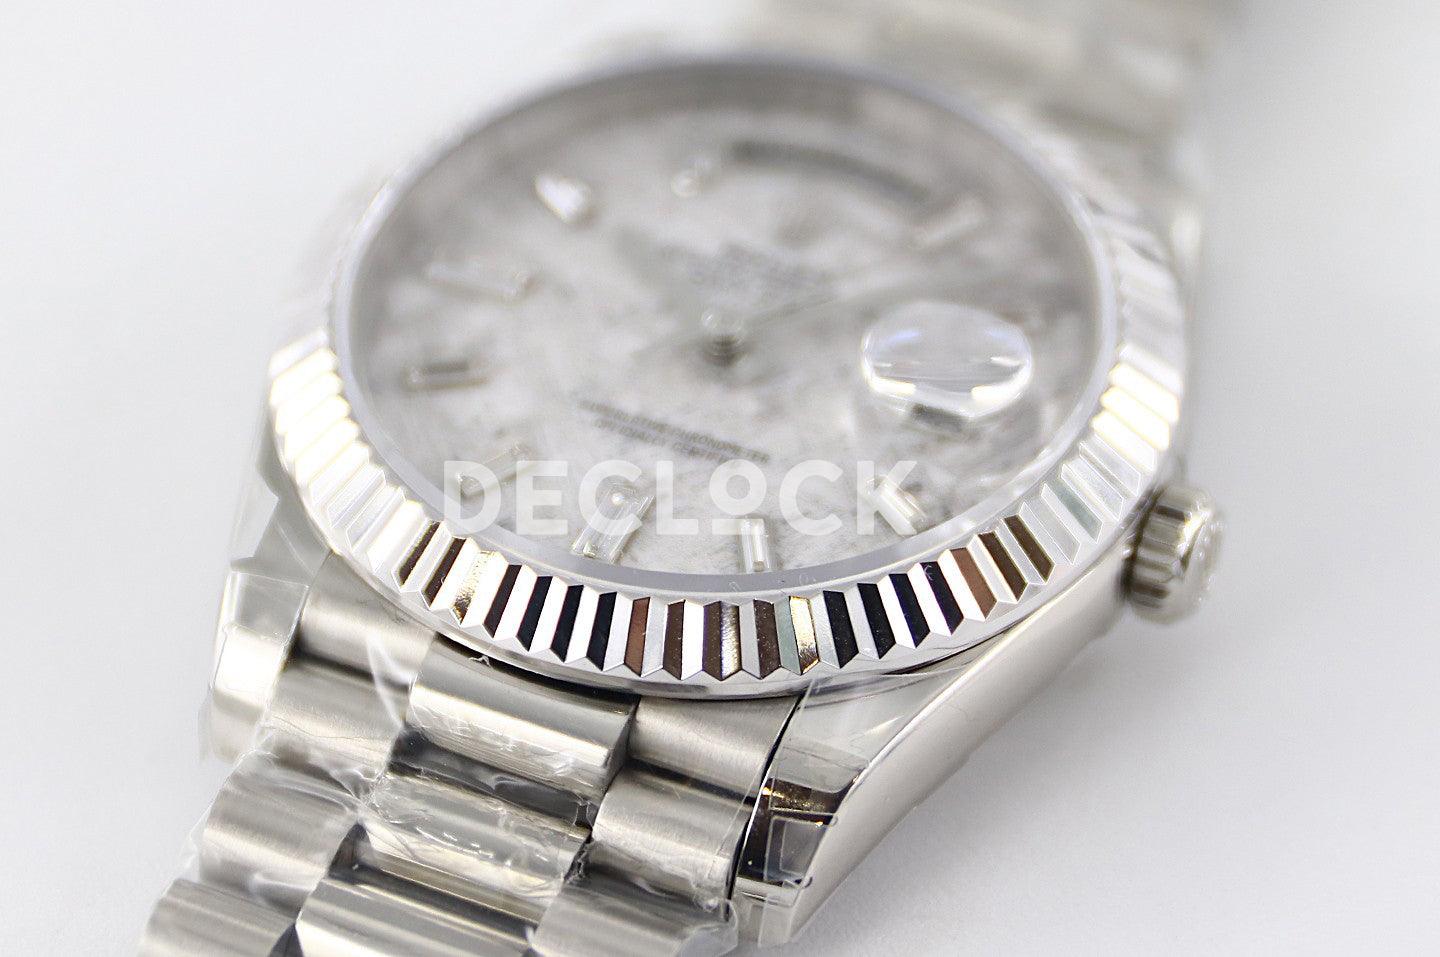 Replica Rolex Day-Date 36/40 228239 Meteorite Dial with Diamond Markers in White Gold - Replica Watches